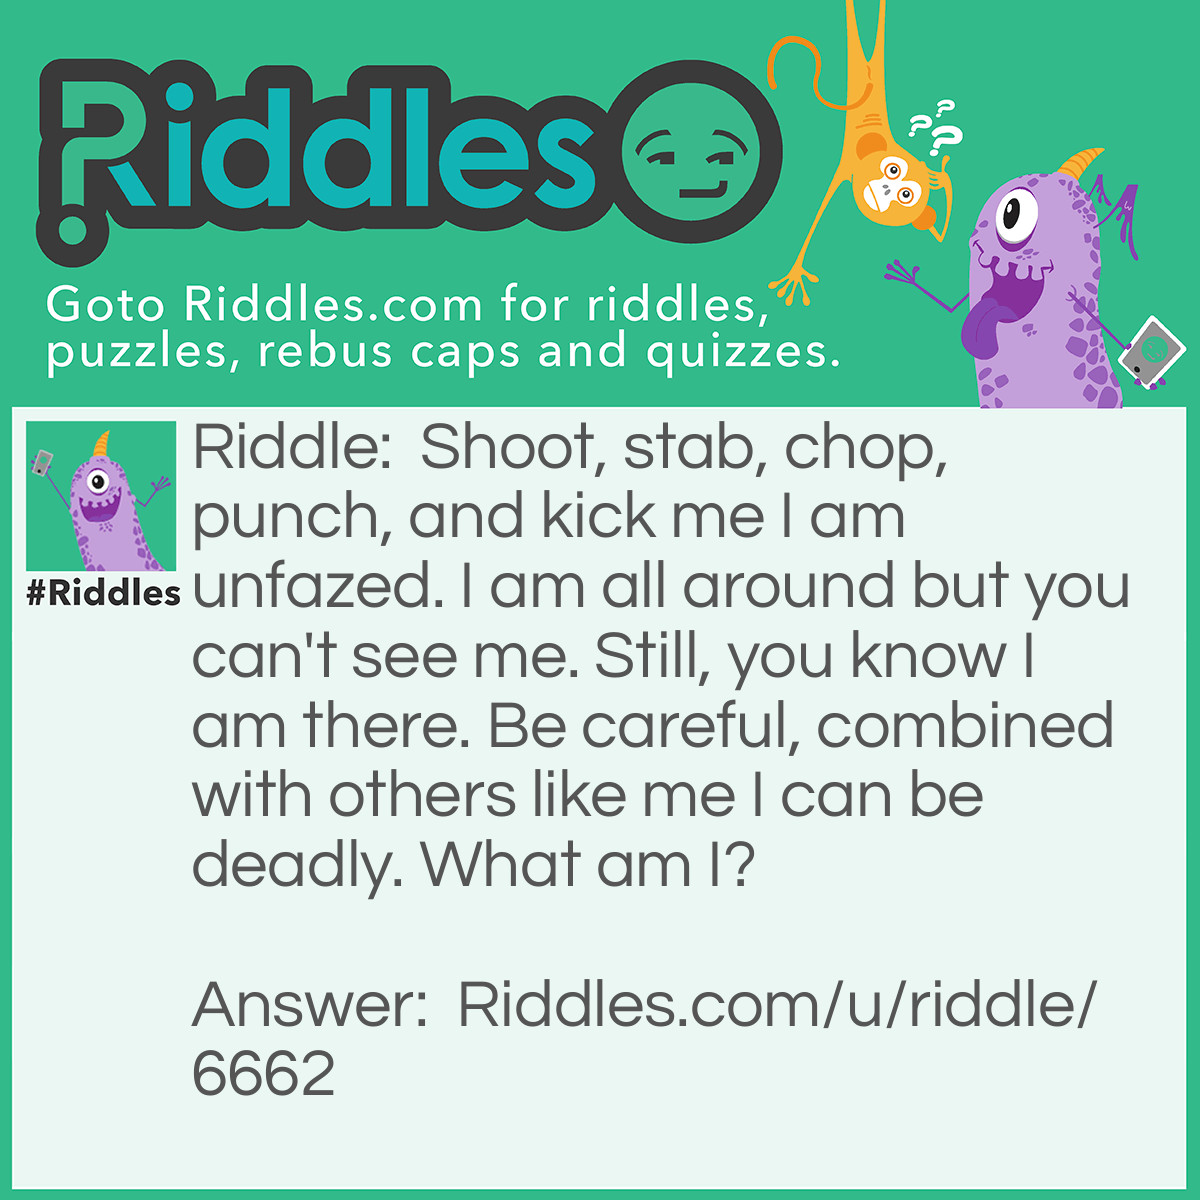 Riddle: Shoot, stab, chop, punch, and kick me I am unfazed. I am all around but you can't see me. Still, you know I am there. Be careful, combined with others like me I can be deadly. What am I? Answer: Gas/Air.